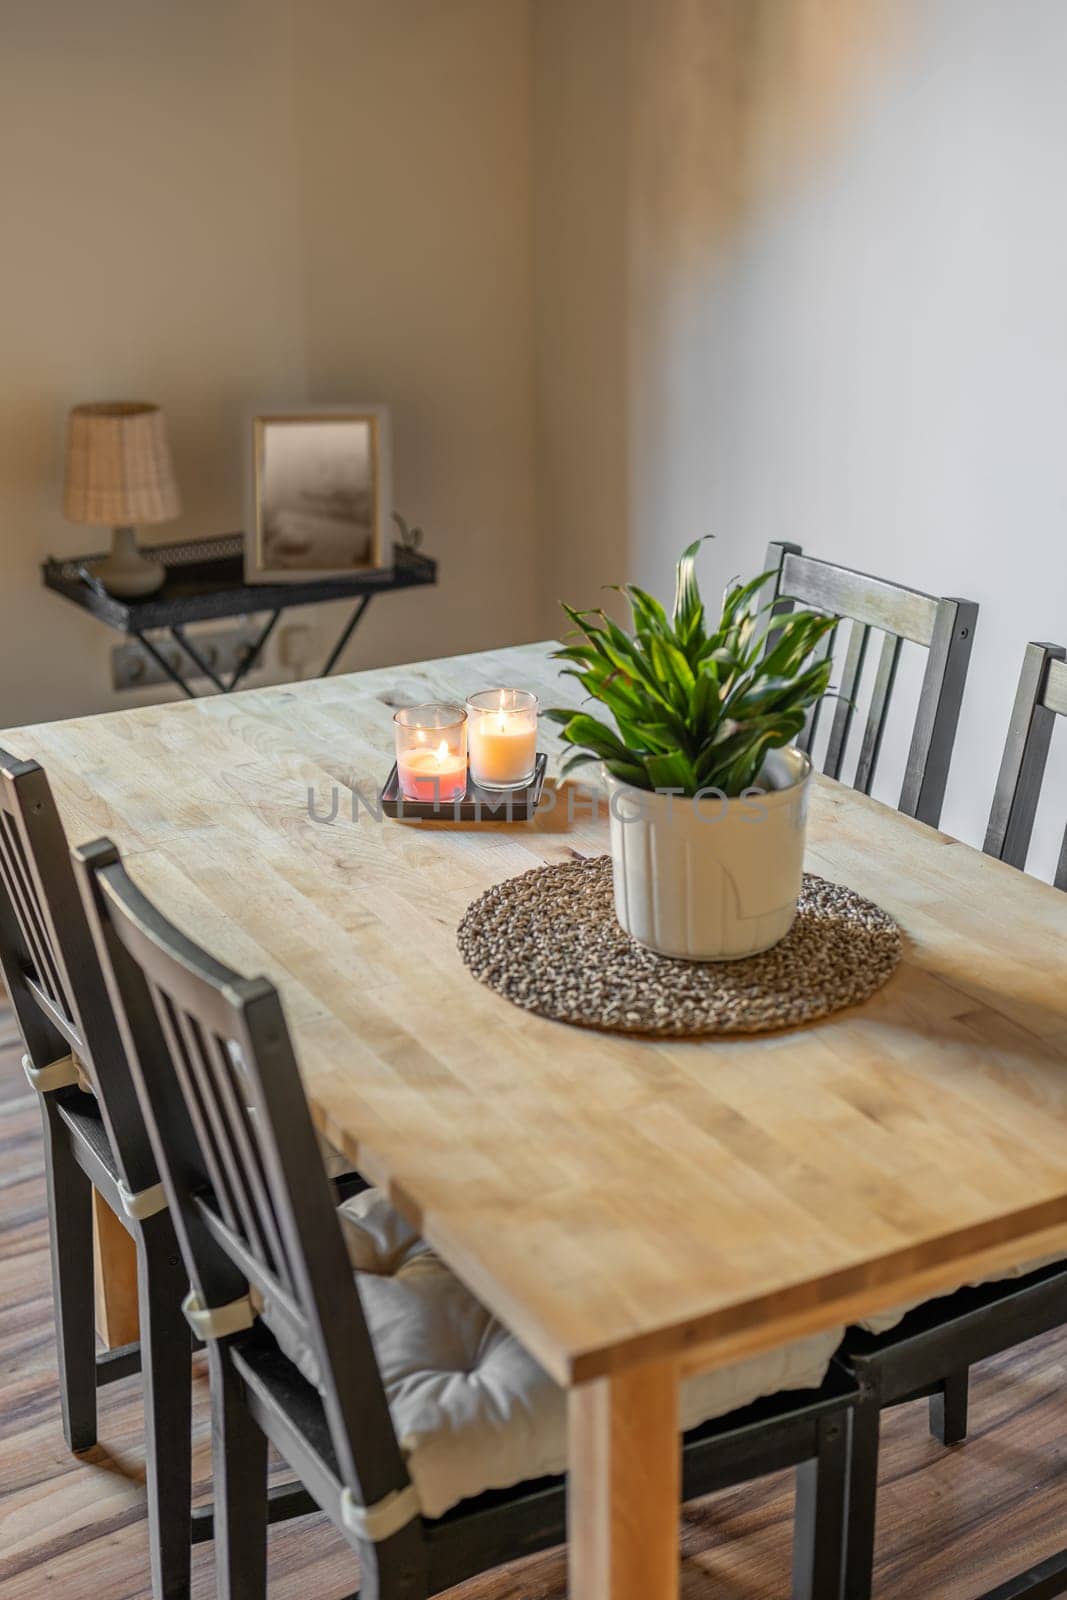 Top view of wooden dining table with chairs and decorative elements plant, candles, pillows on a light wall background. Concept of stylish interior and natural materials in the decor.